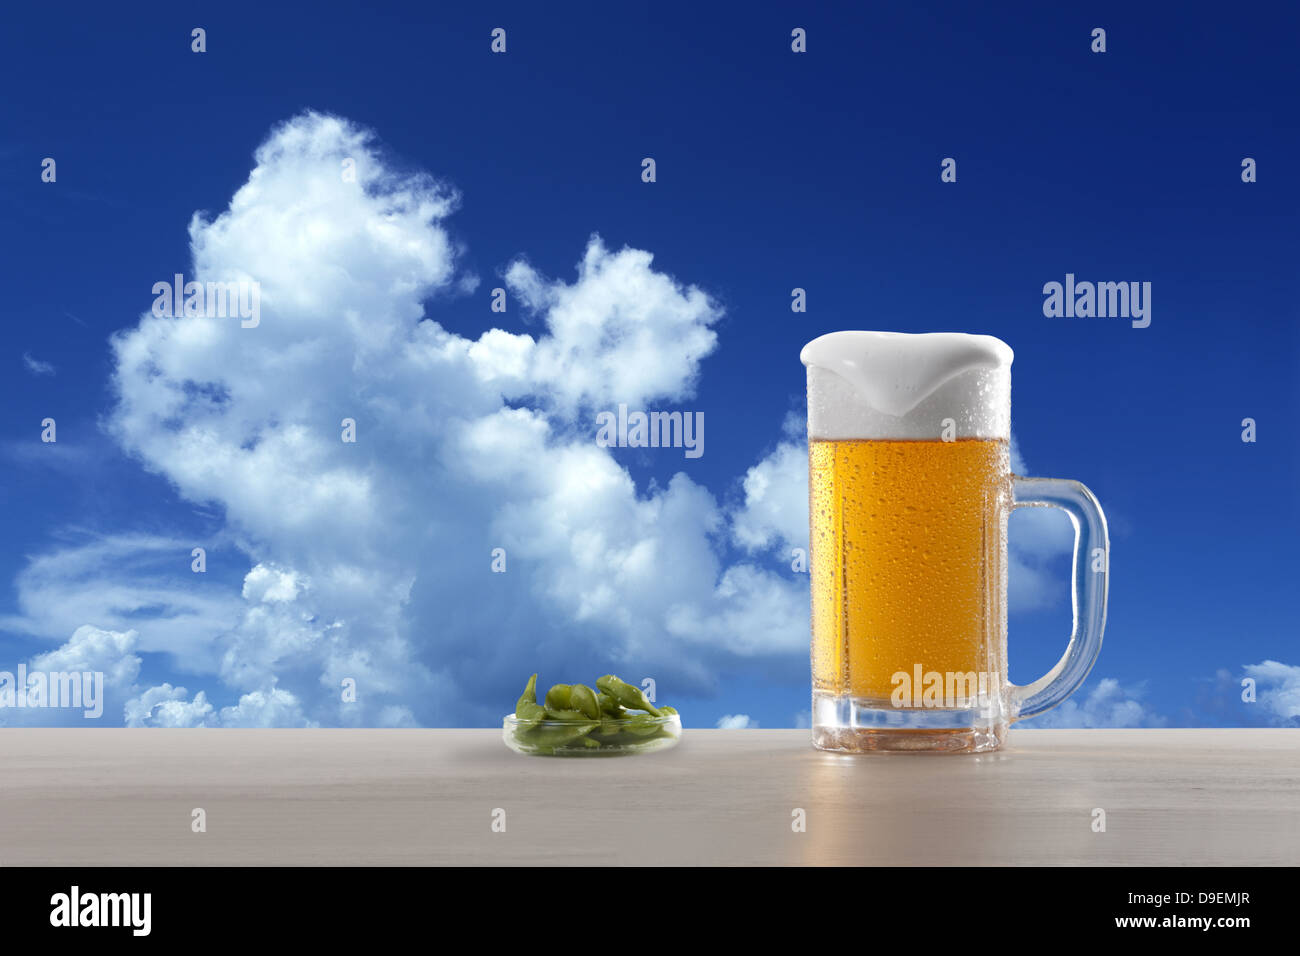 Beer, soybeans and blue sky with clouds Stock Photo